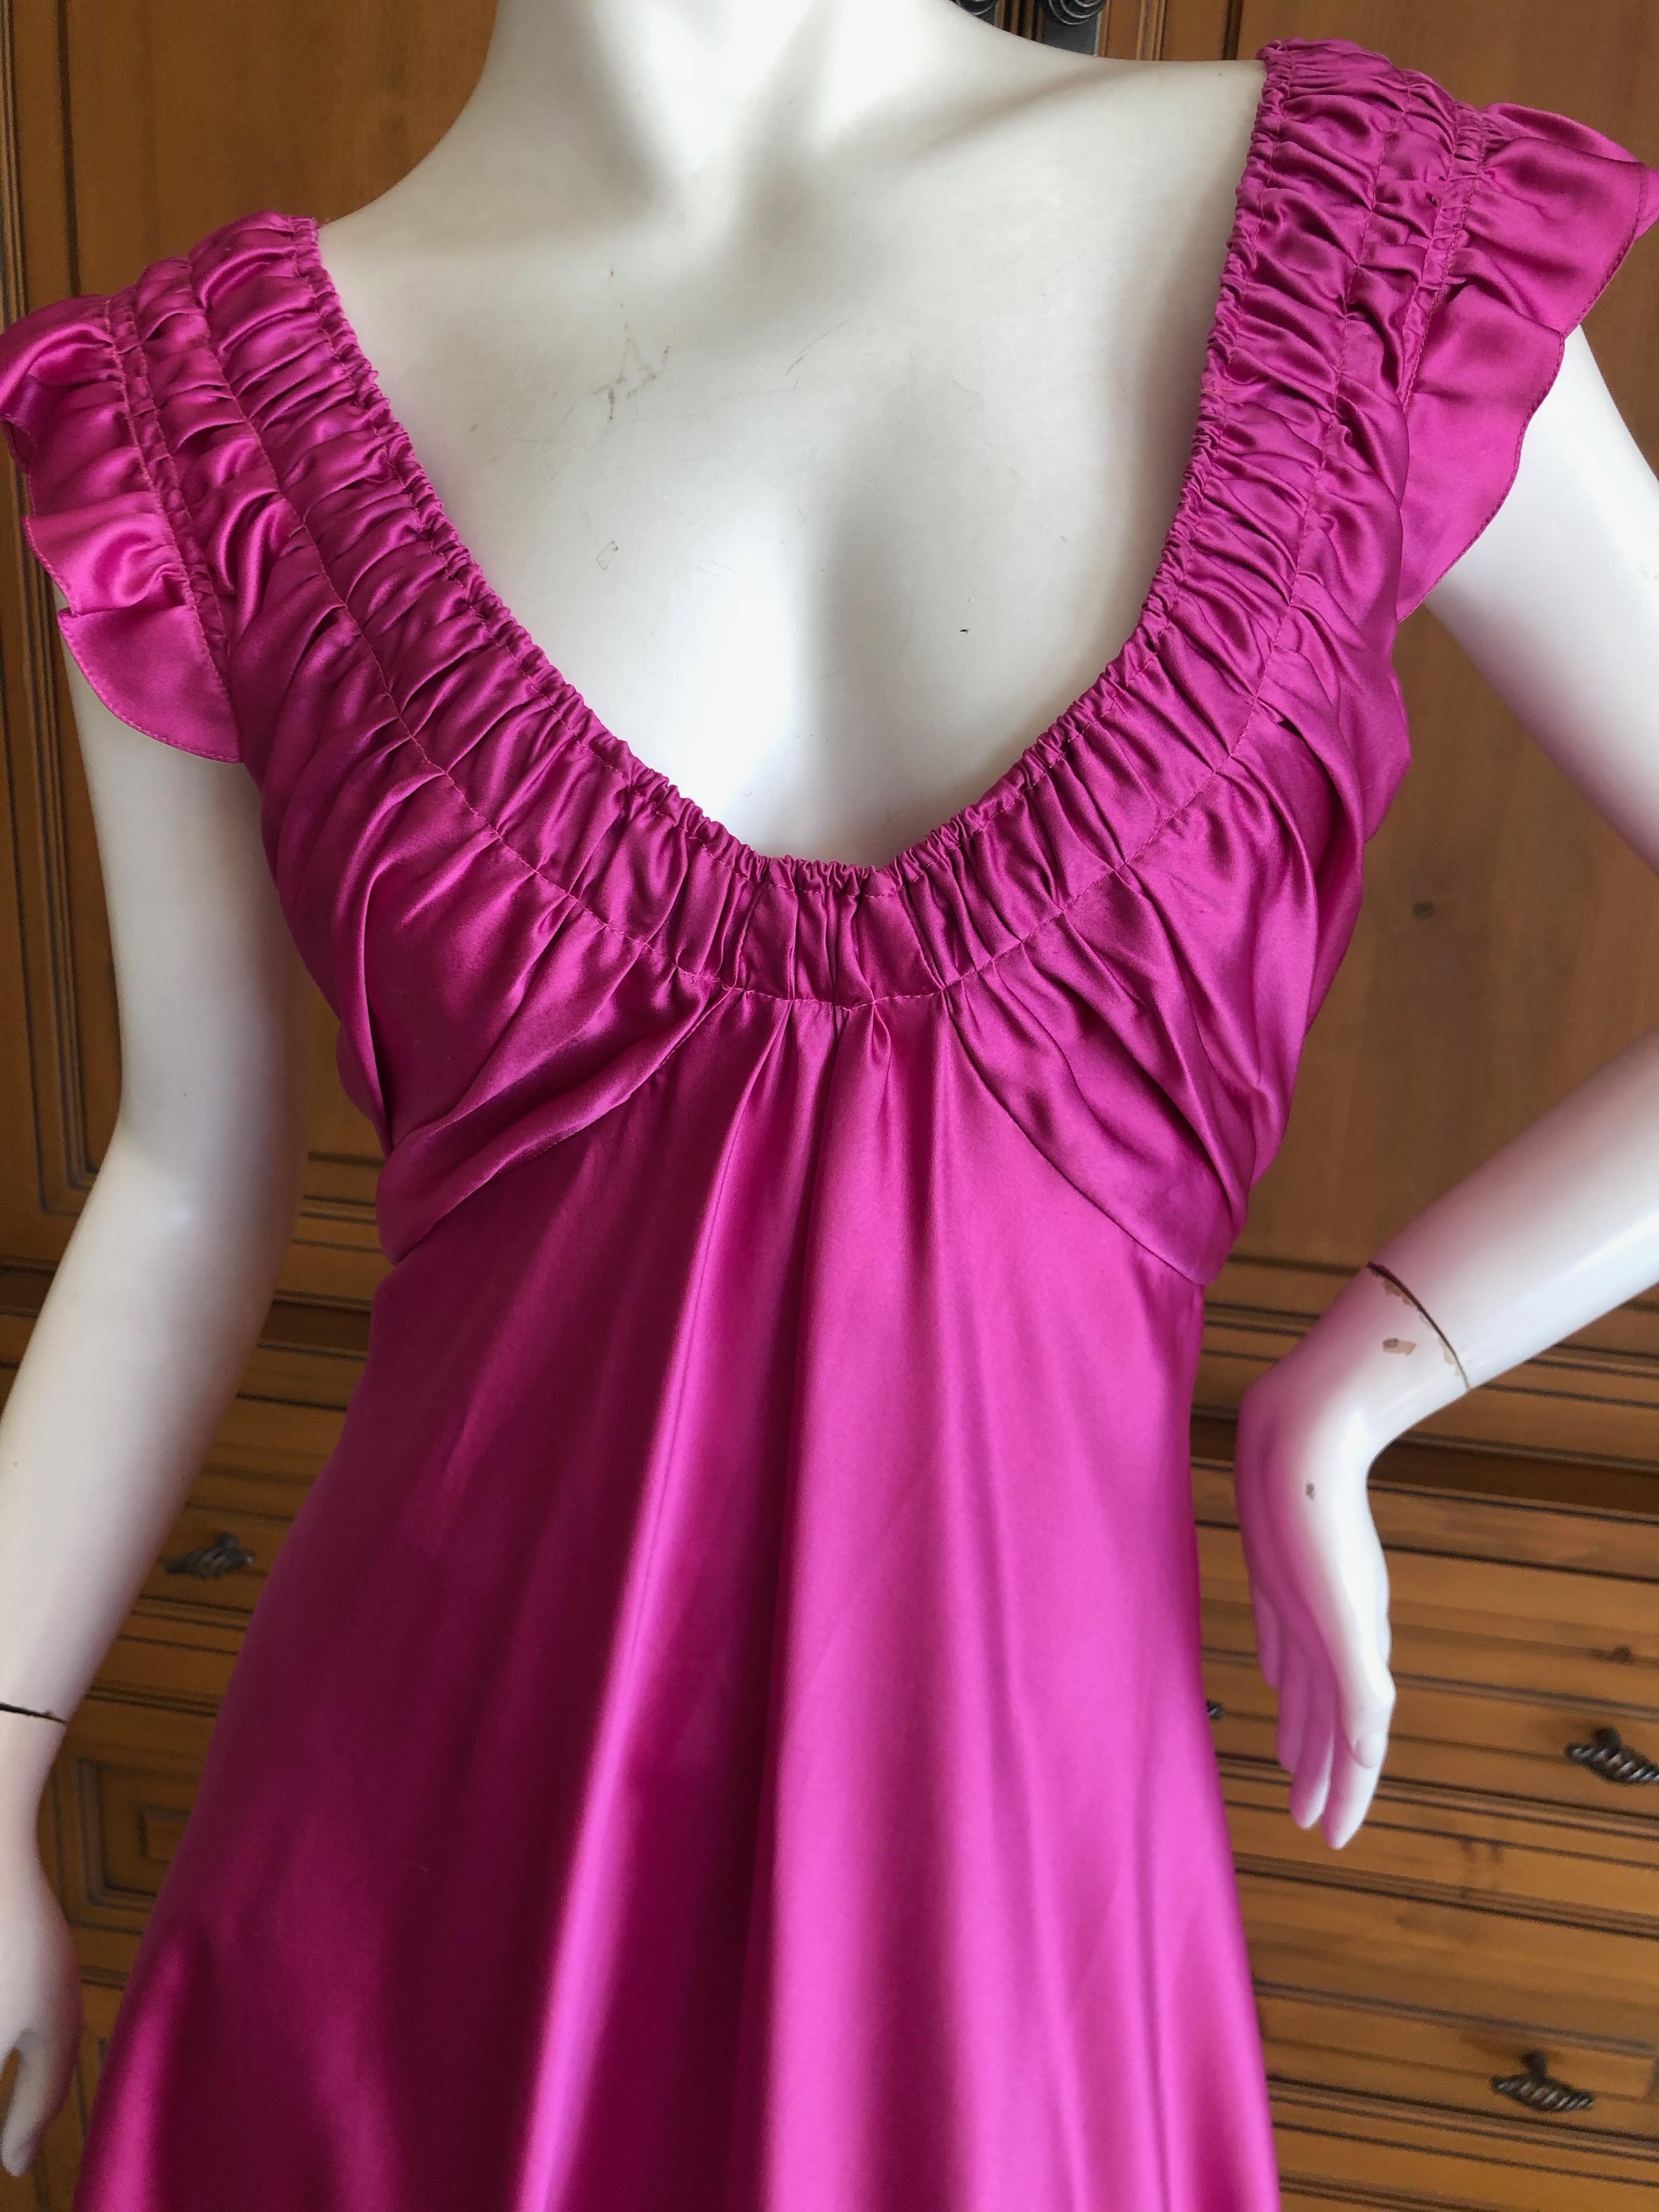   John Galliano Vintage Pink Low Cut Dress with Gathered Details For Sale 3